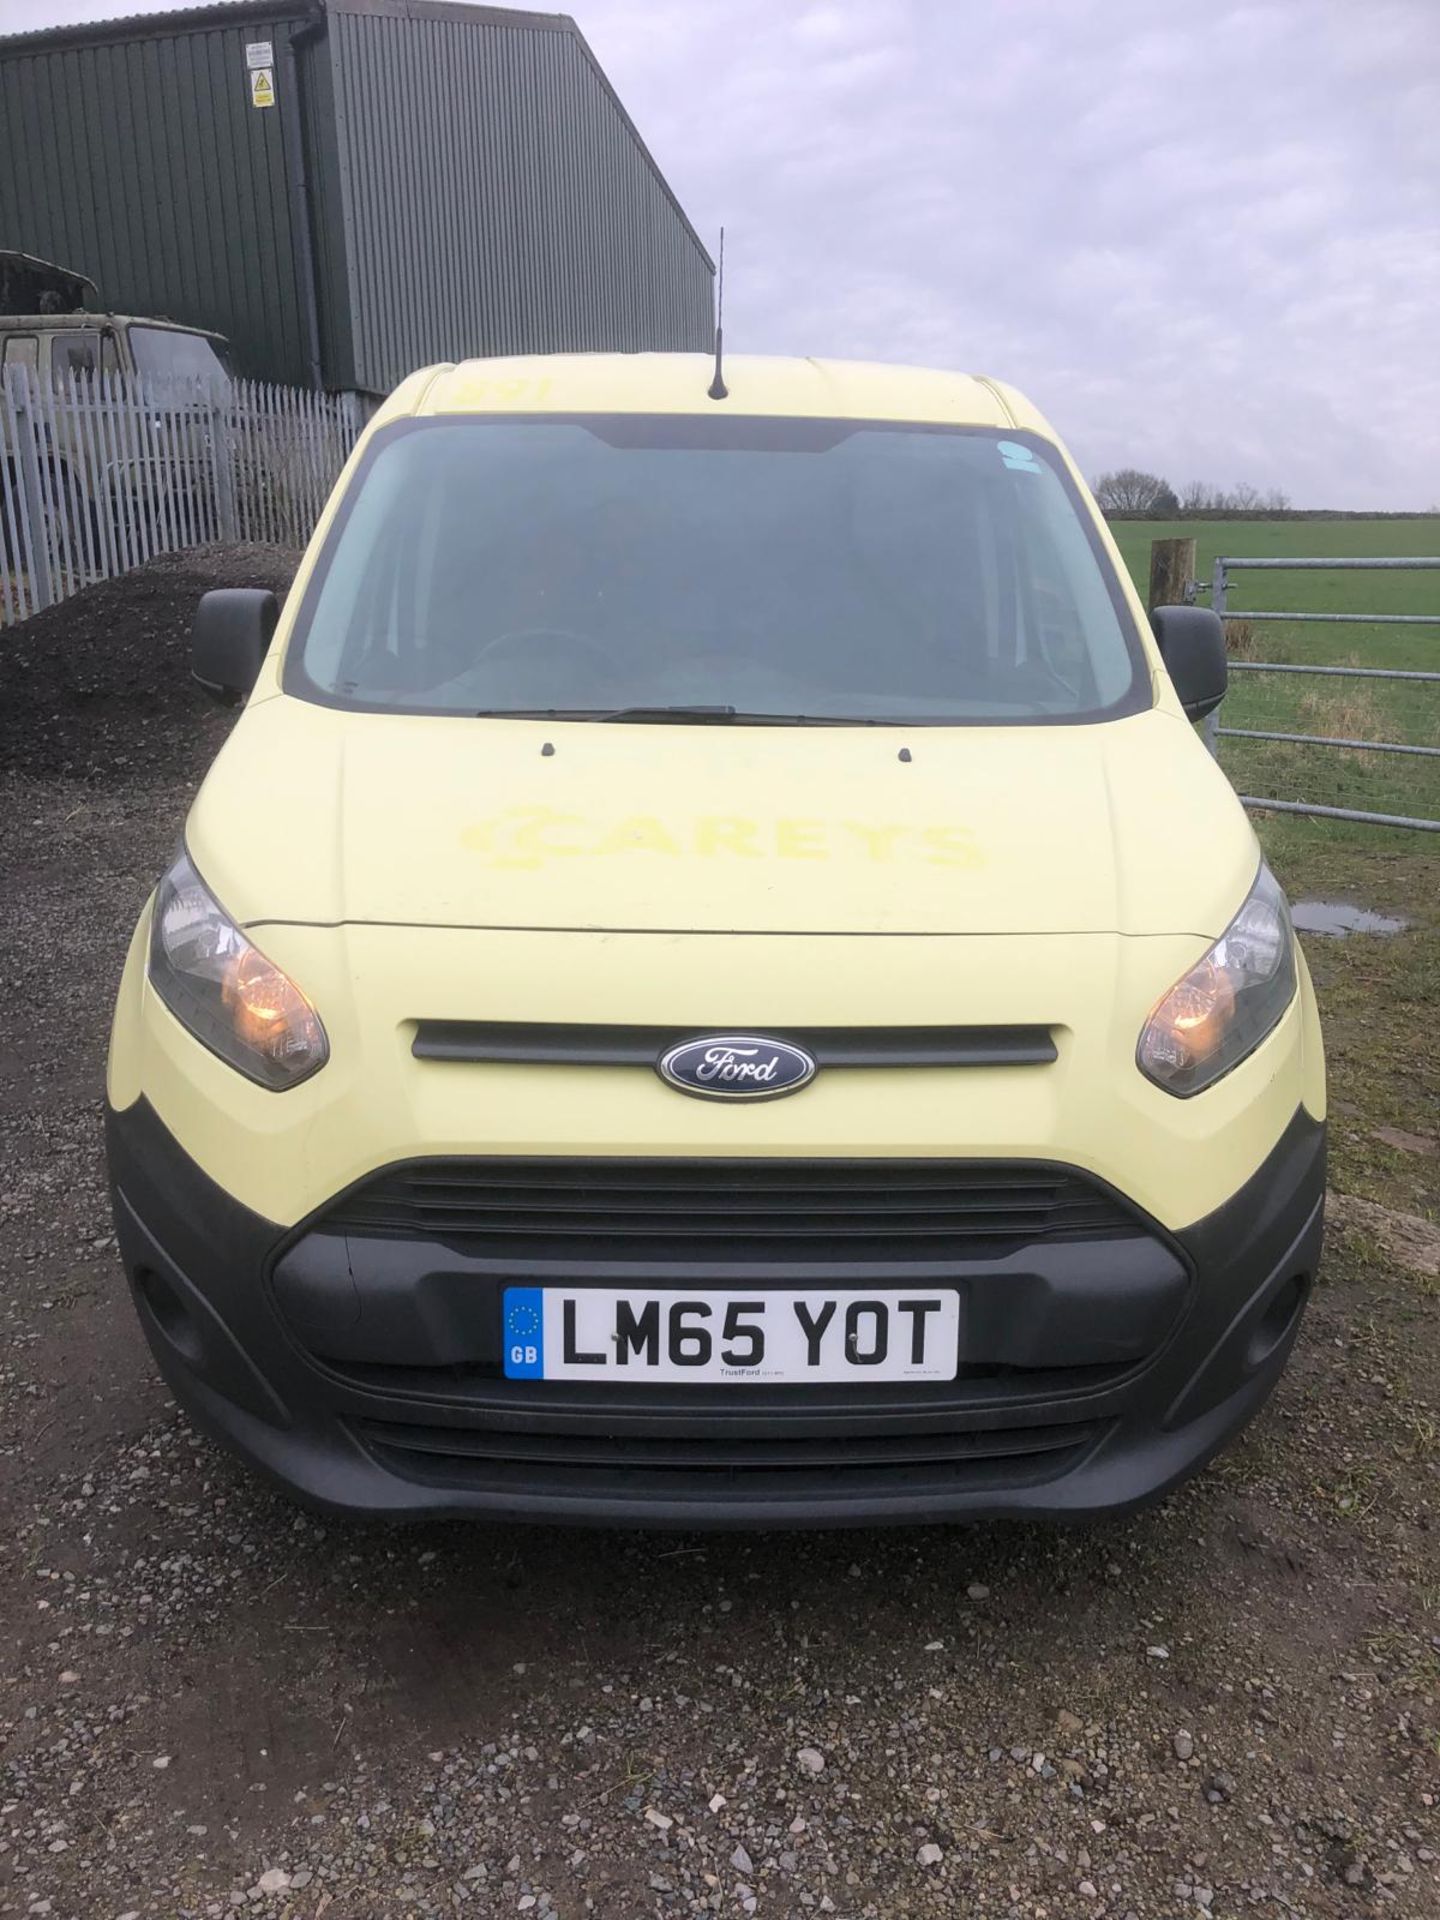 2015 FORD TRANSIT CONNECT 200 PANEL VAN - 1.6 TDCI - 91621 MILES - Image 15 of 15